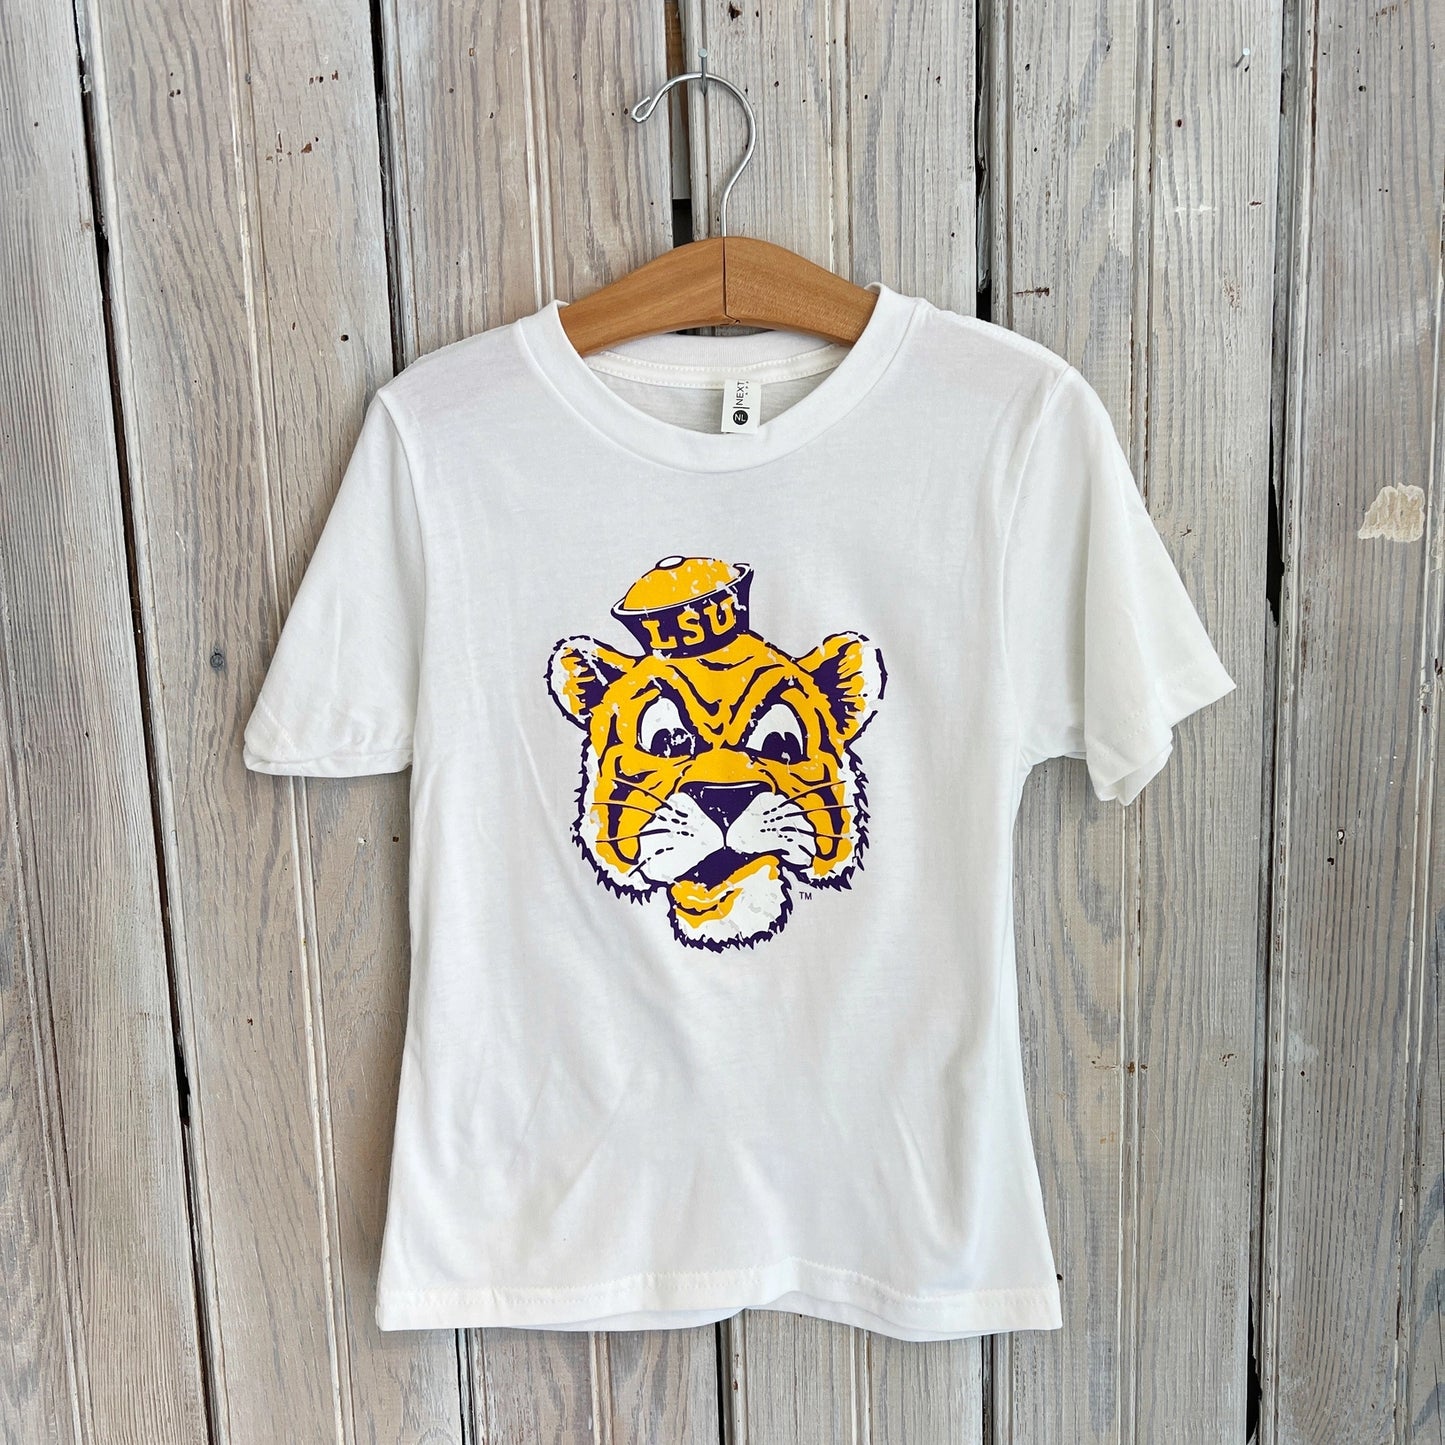 LSU Tigers Kid's T-Shirt  White Sailor Mike